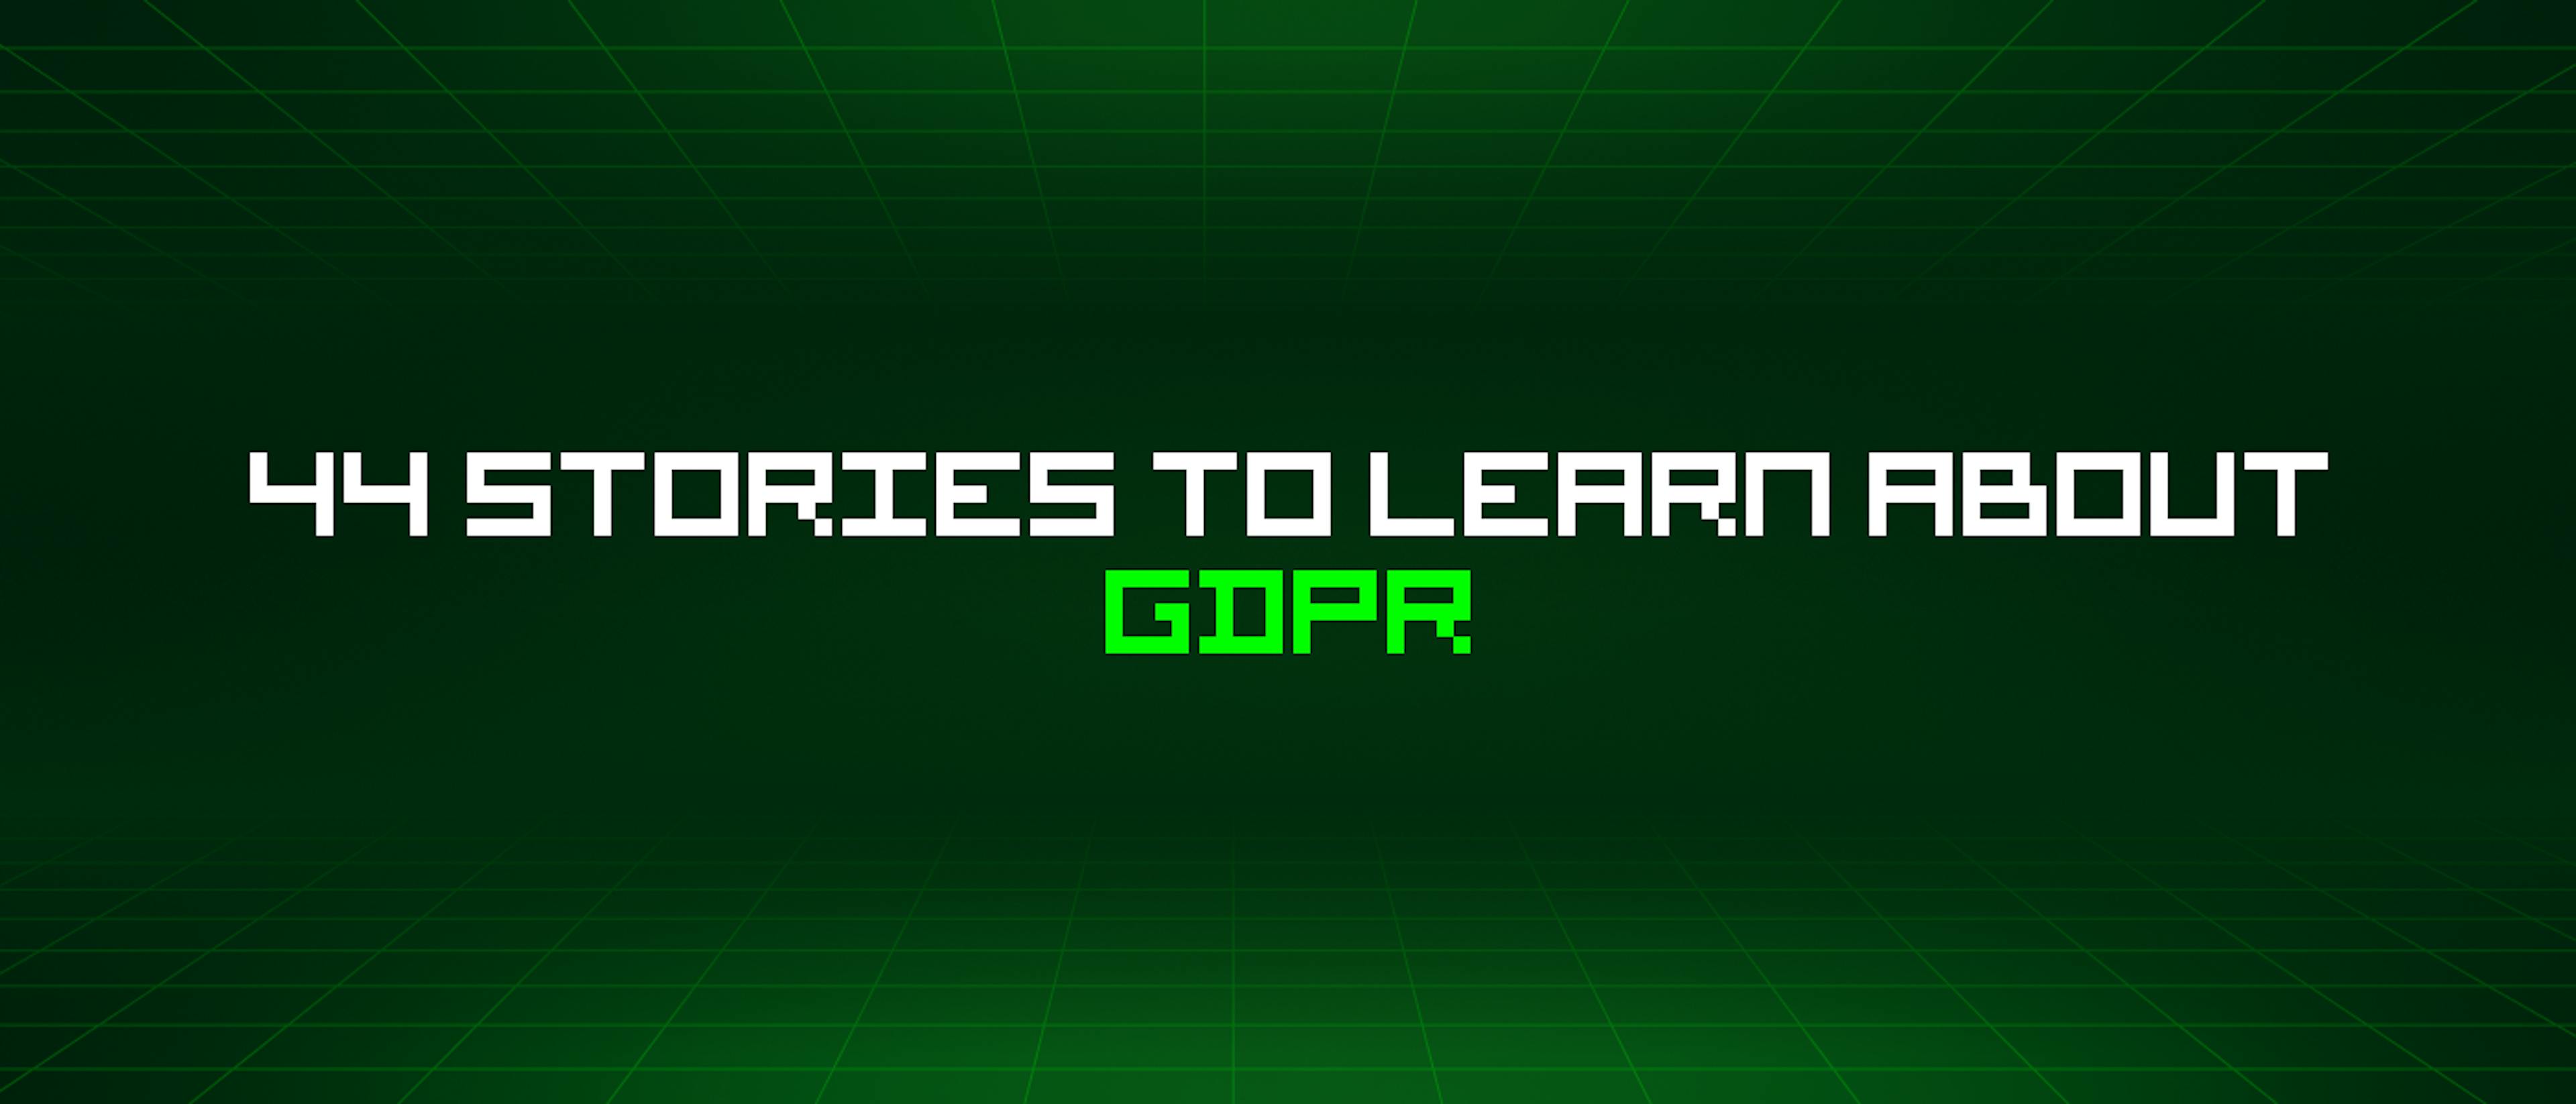 featured image - 44 Stories To Learn About Gdpr